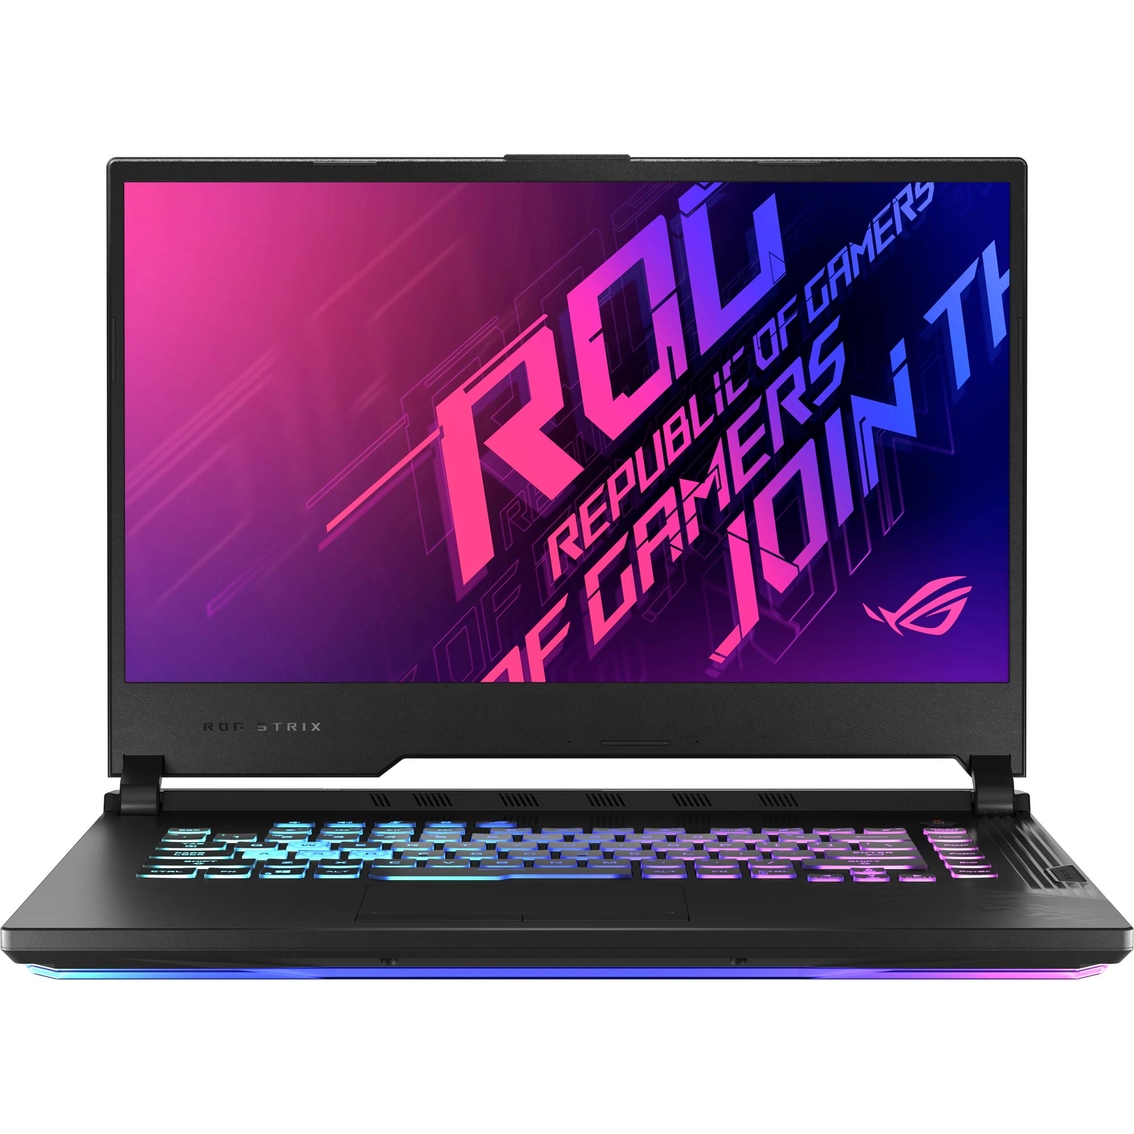 Asus Rog Strix 15 15.6 In. Intel Core I7 2.6ghz 16gb Ram 512gb Ssd Gaming Notebook | Gaming Laptops | Holiday | Shop The Exchange